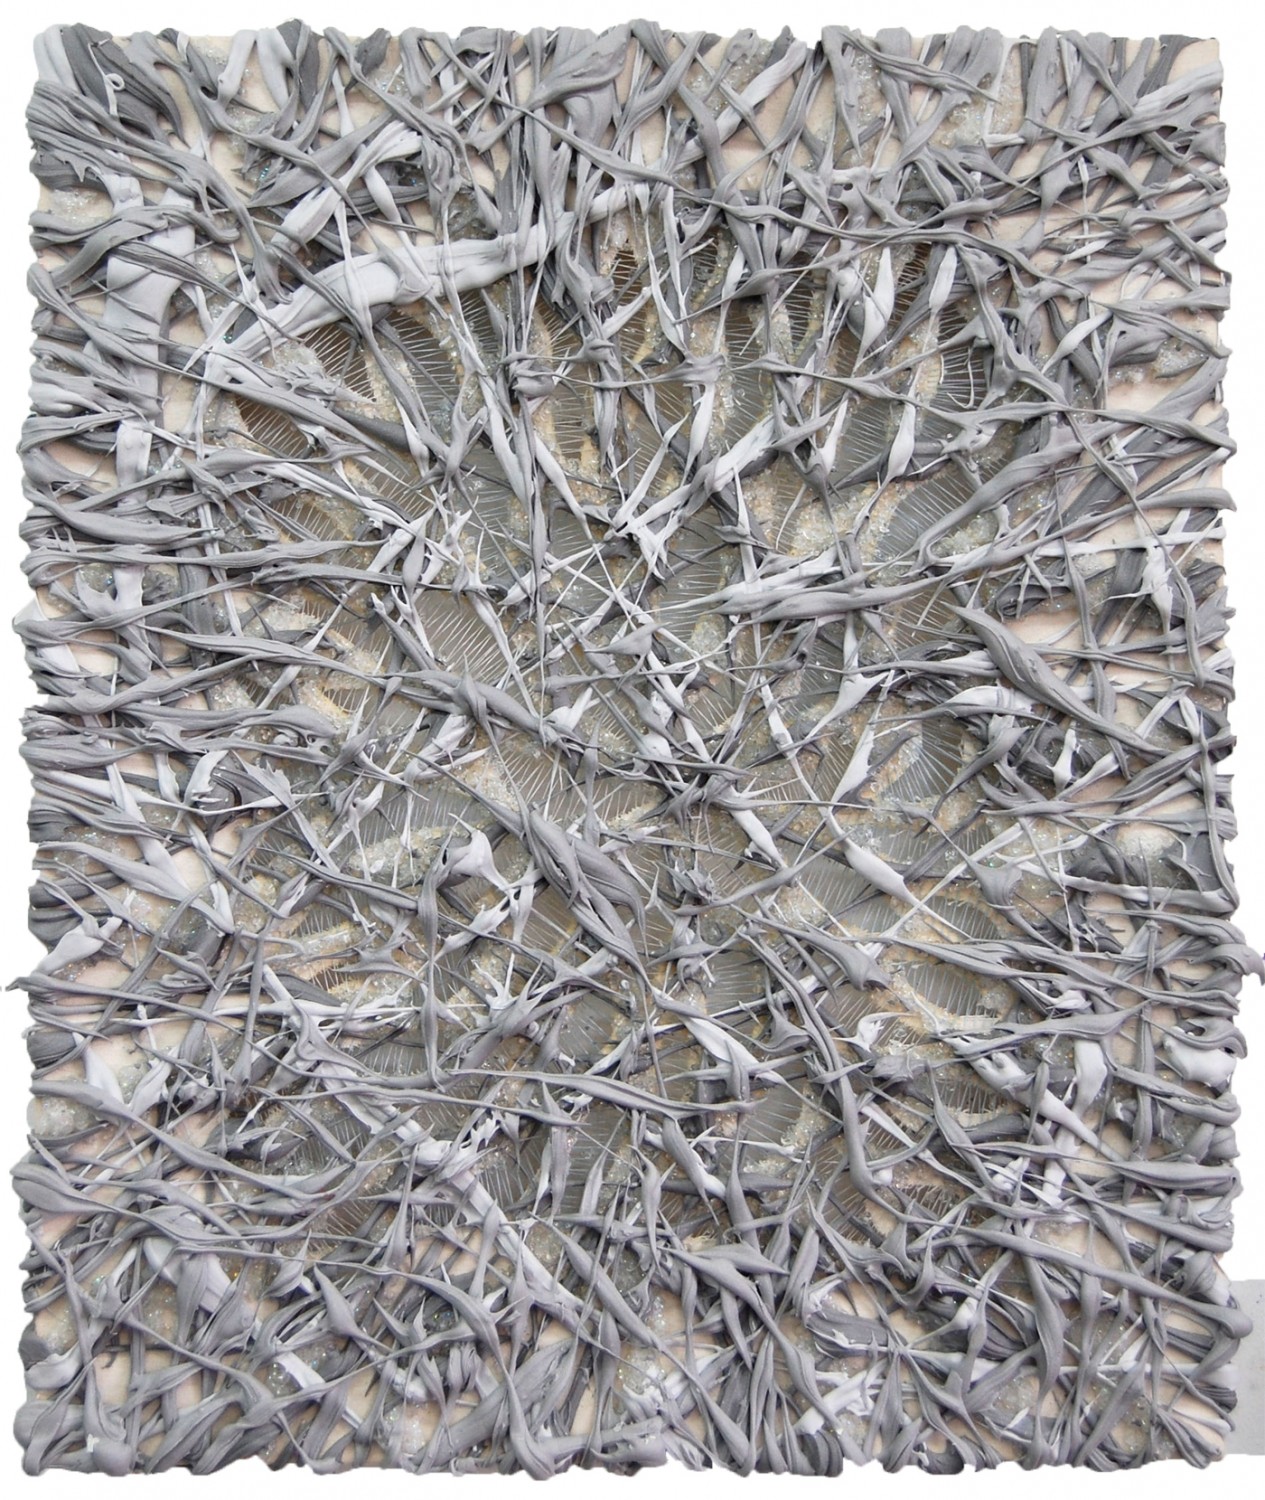 Gray Matter II, 2010, Ultralight, glass beads, pigment dispersions and thread on canvas